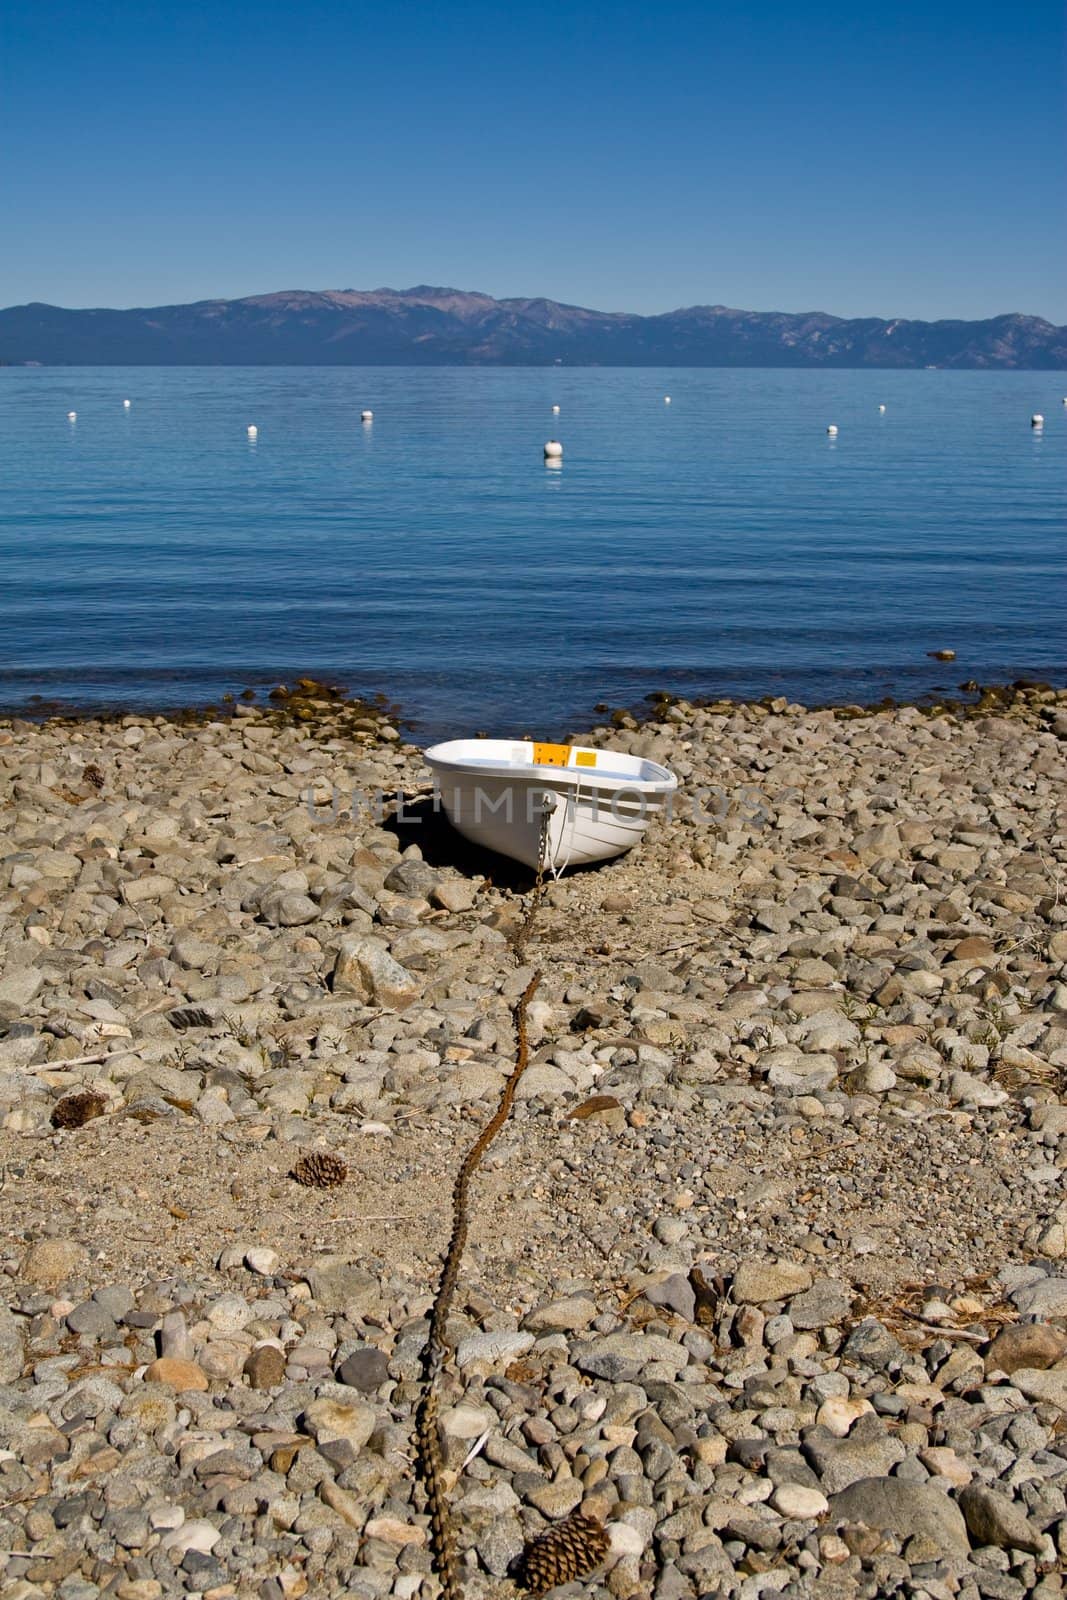 Landscape of boat chained to shore, mountains in background